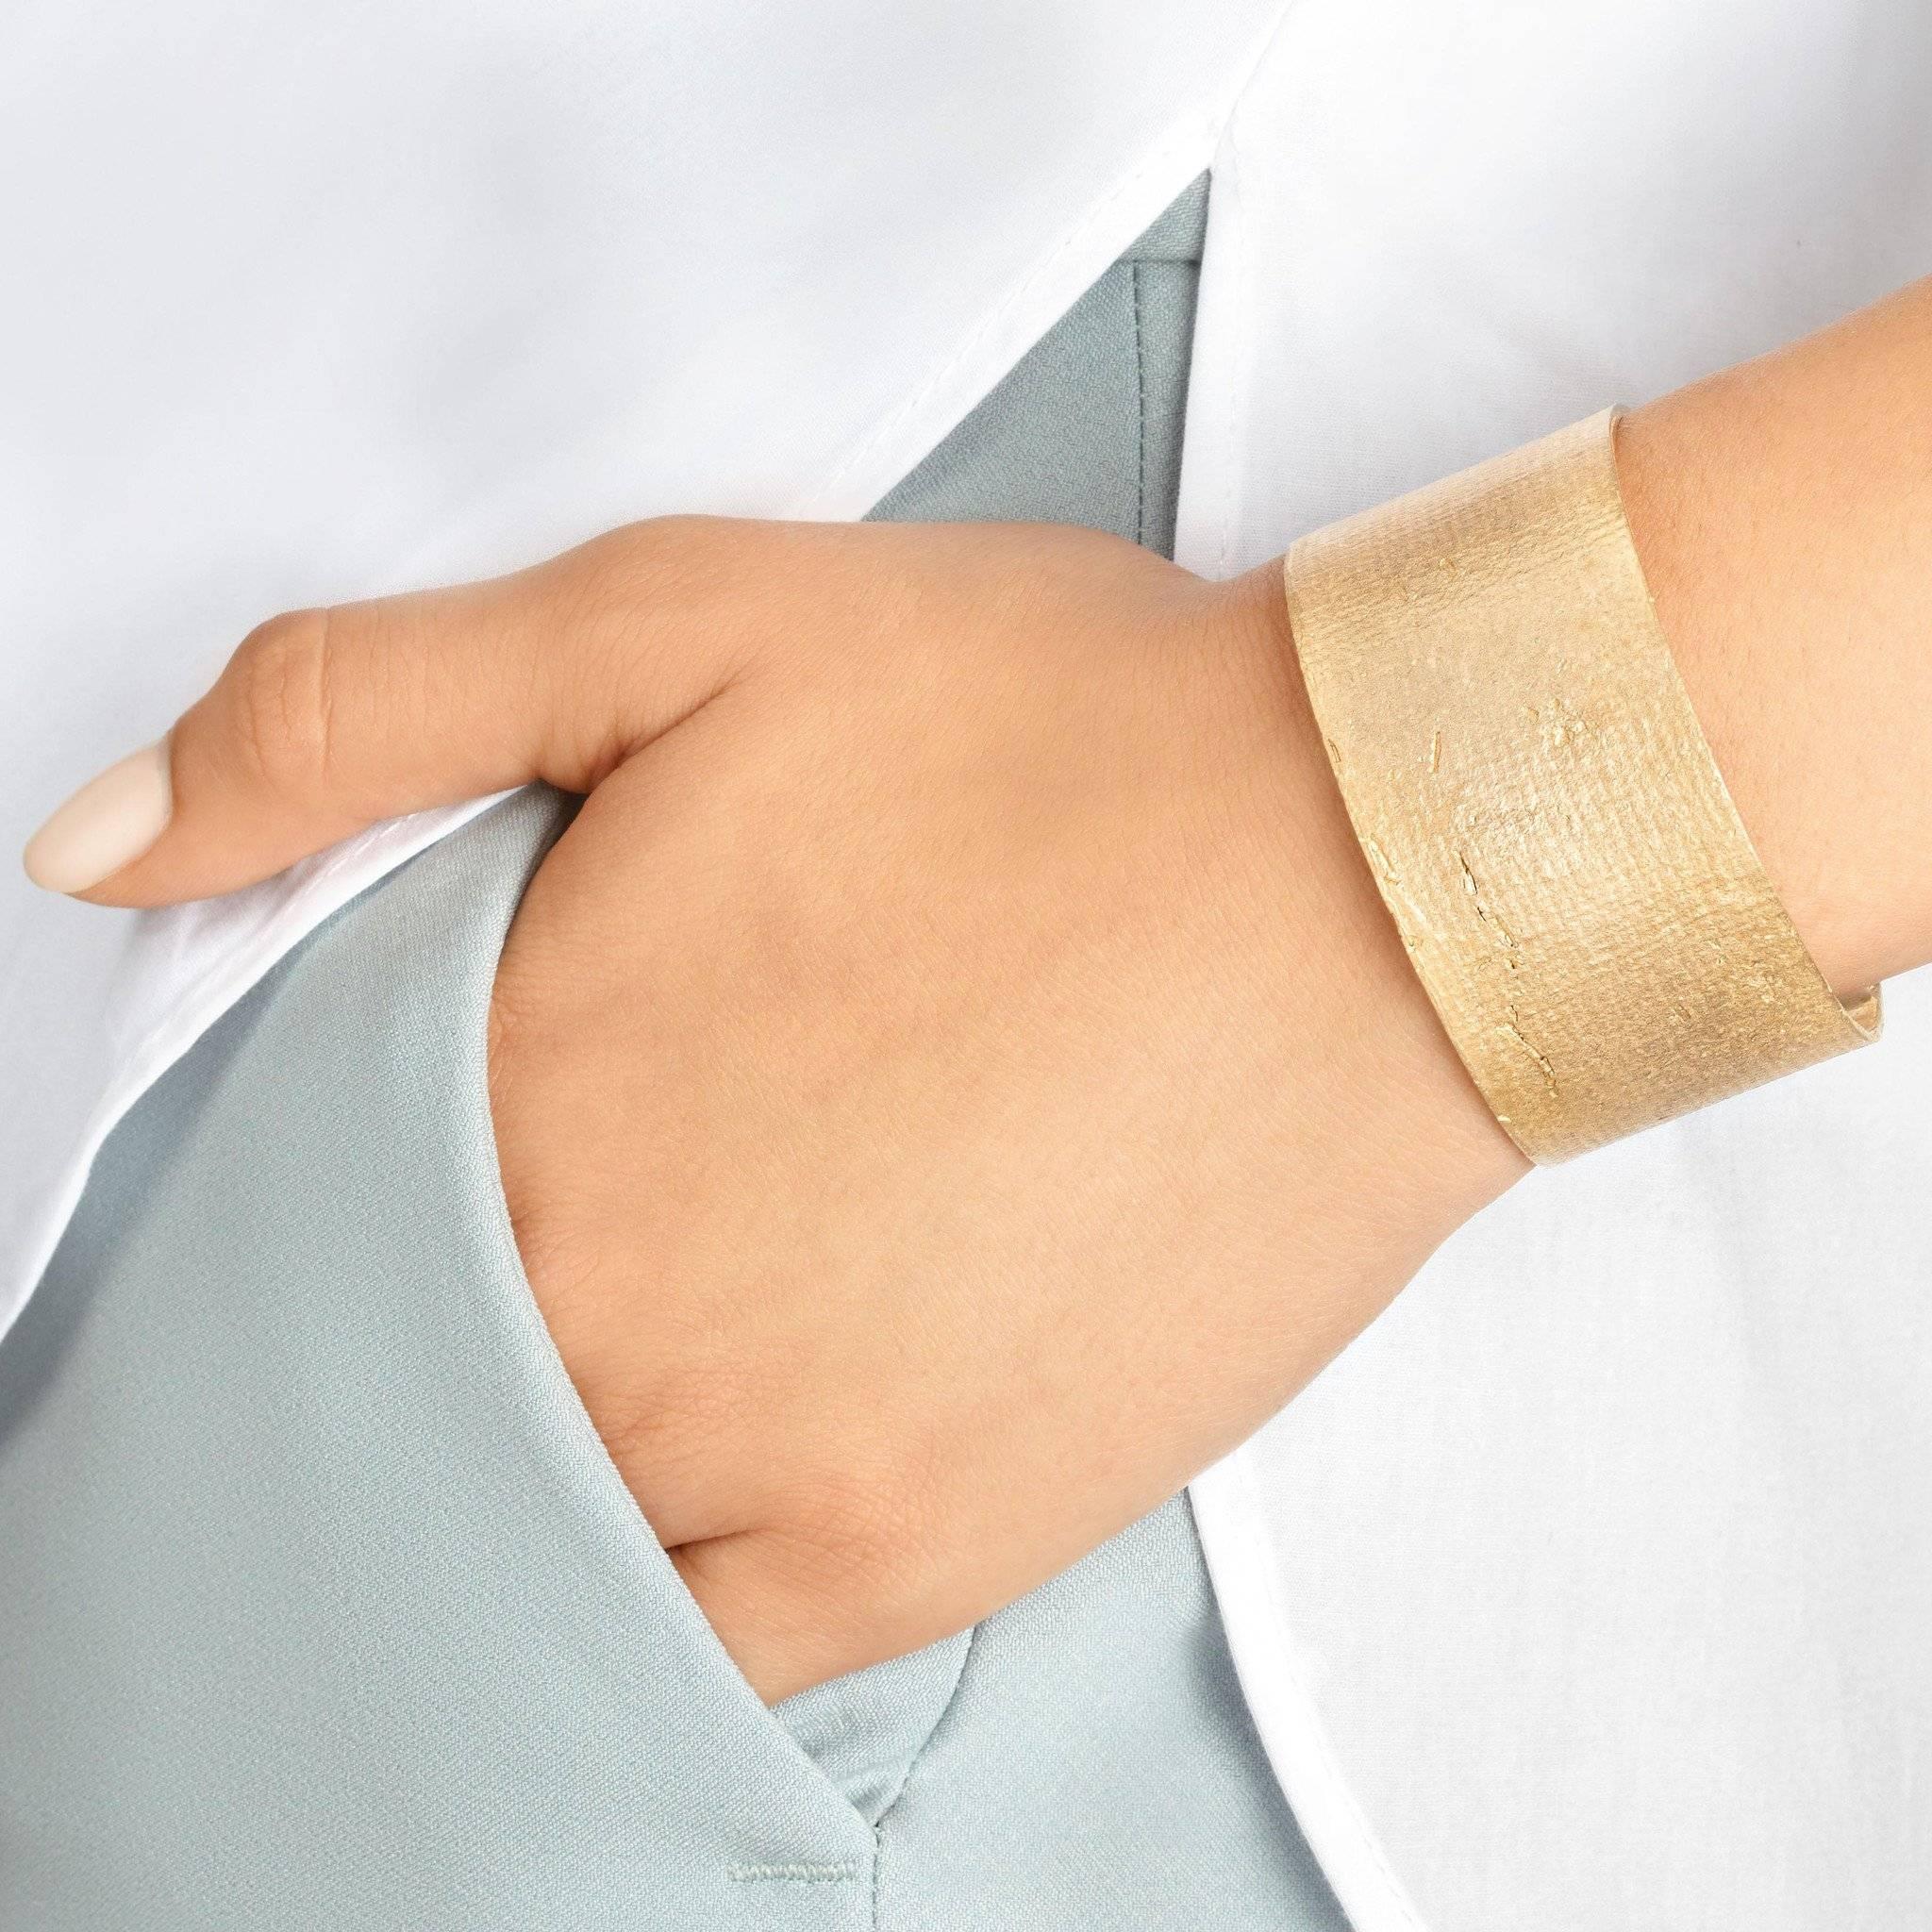 Crafted in solid, glowing bronze, the Mega Cuff is a subtle statement piece for every day. The unique texture adds interest to this classic wide cuff.   

Every piece in this collection is individually hand-crafted in paper and cast directly into